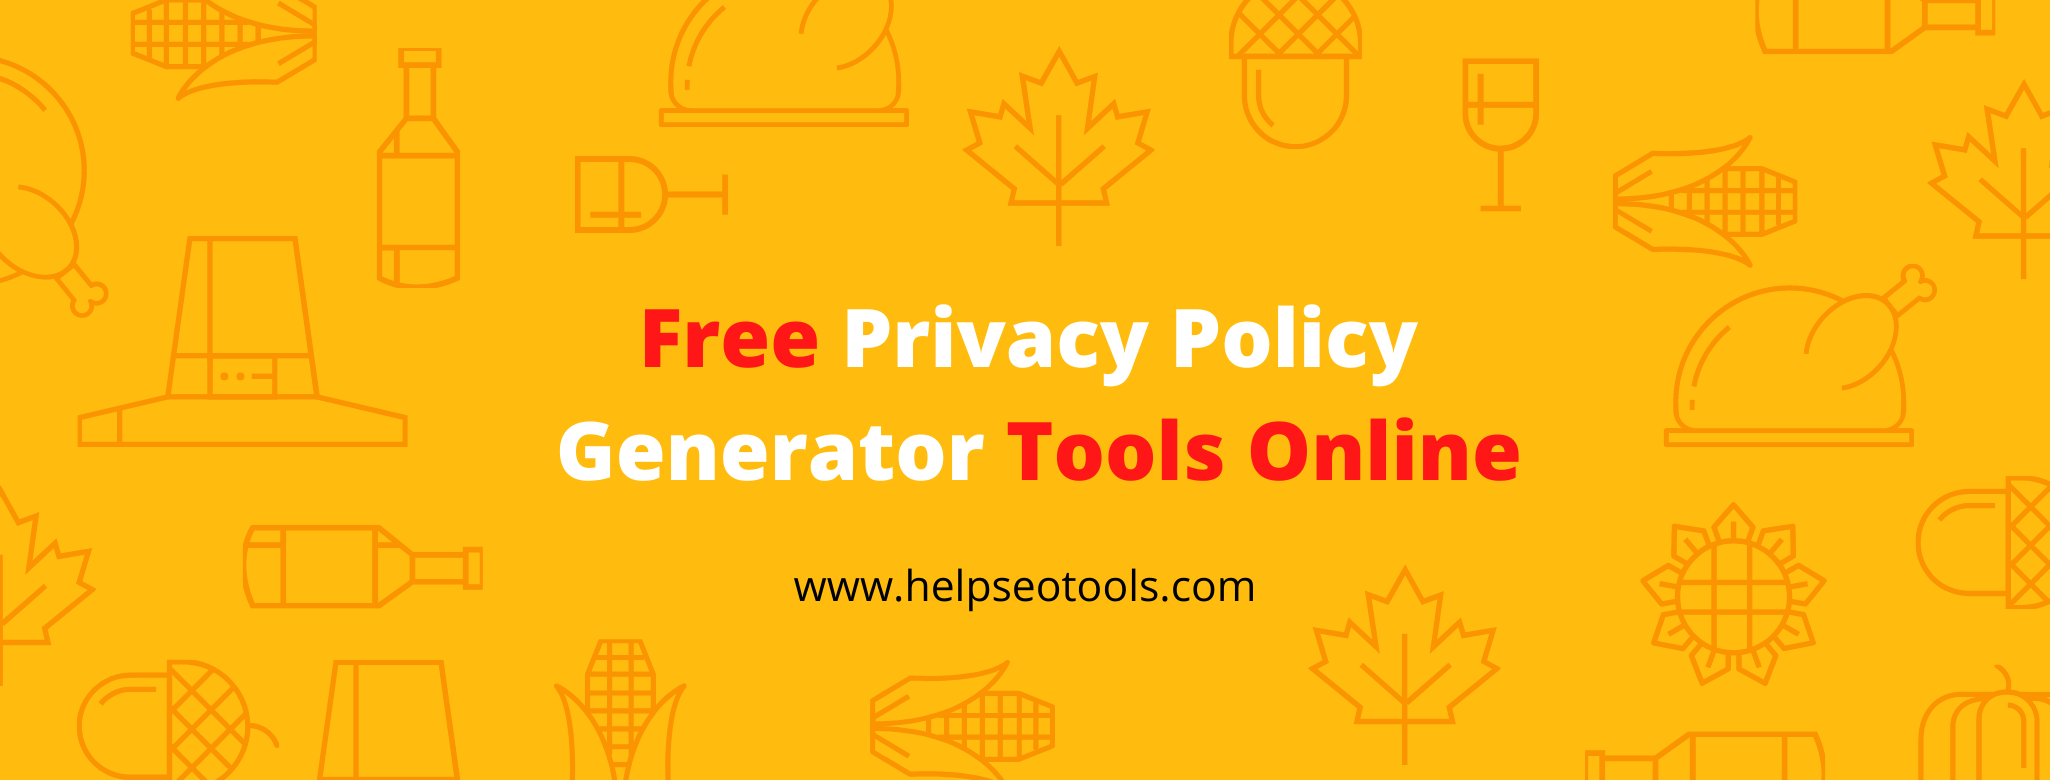 Free Privacy Policy Generator online tool